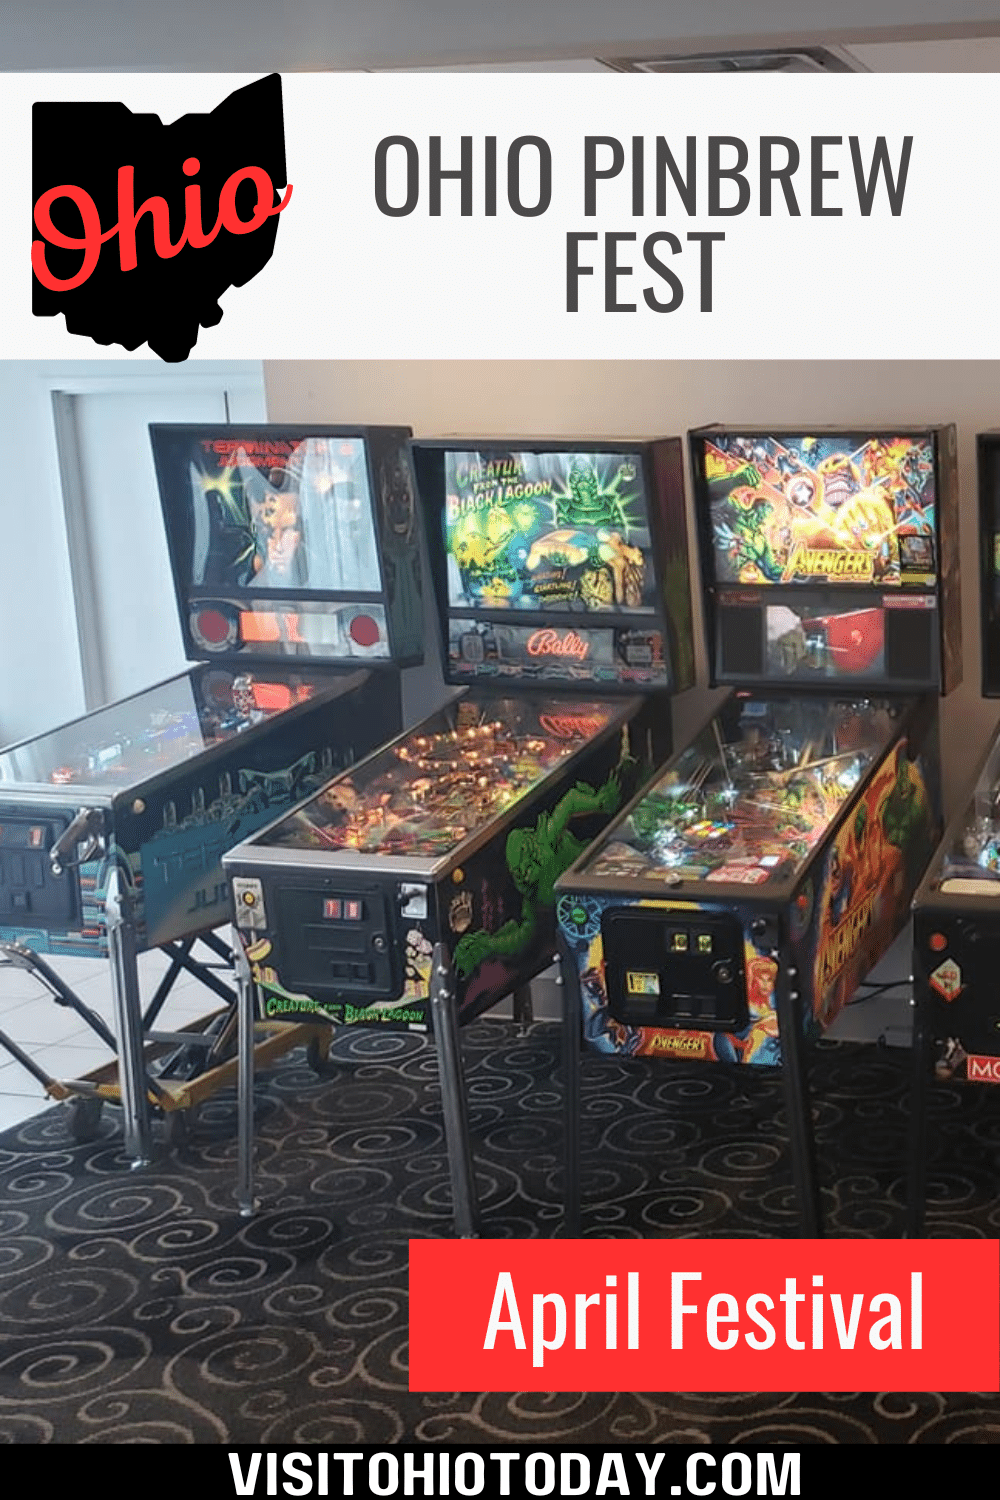 The Ohio PinBrew Fest is held in early April. This event features pinball machines and arcades with free play, tournaments, and more.